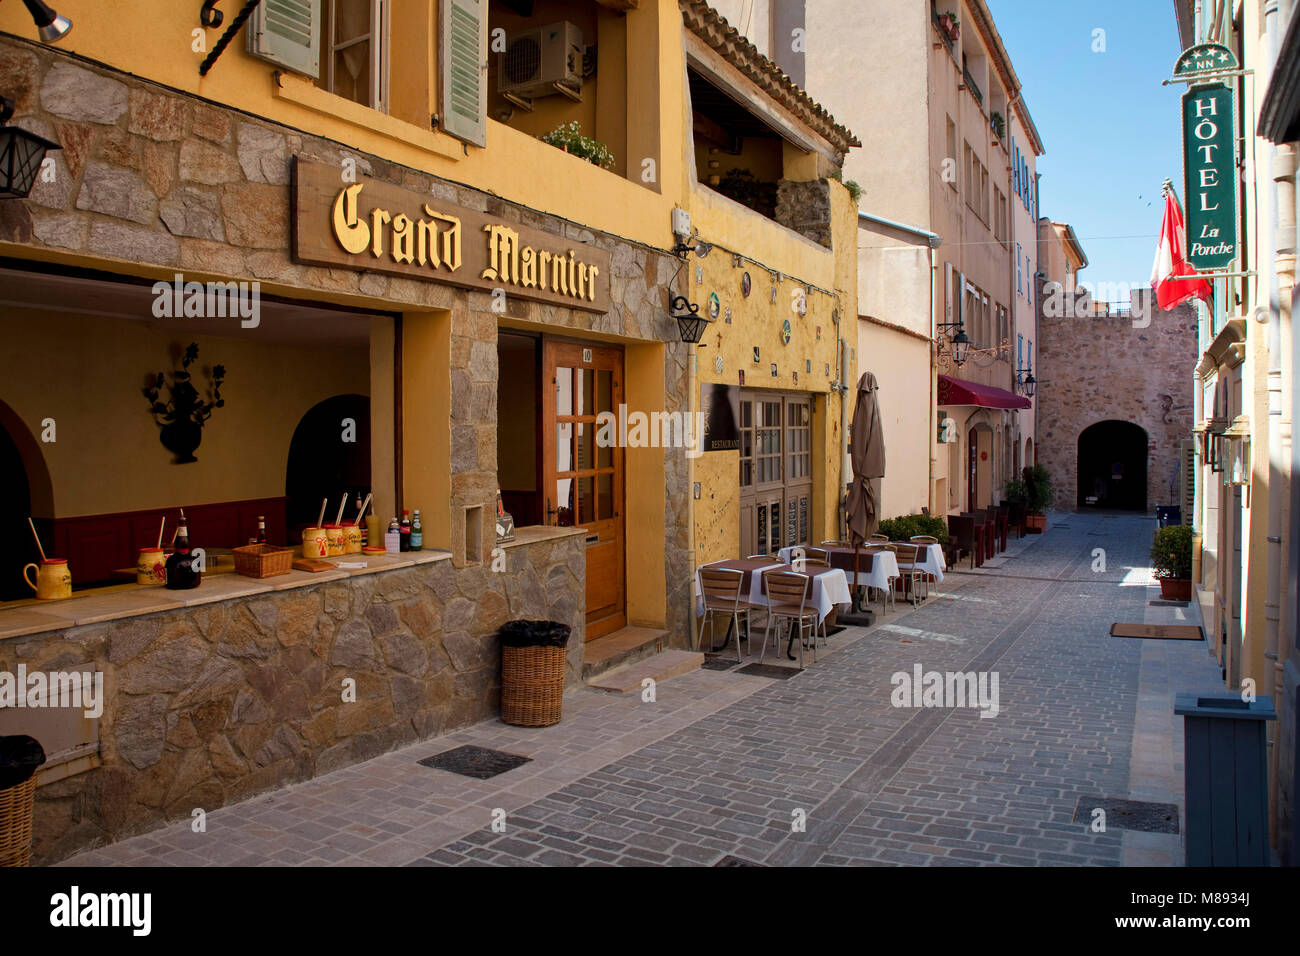 Creperie Grand Marnier, at opposite the hotel La Ponche, old town of Saint-Tropez, french riviera, South France, Cote d'Azur, France, Europe Stock Photo